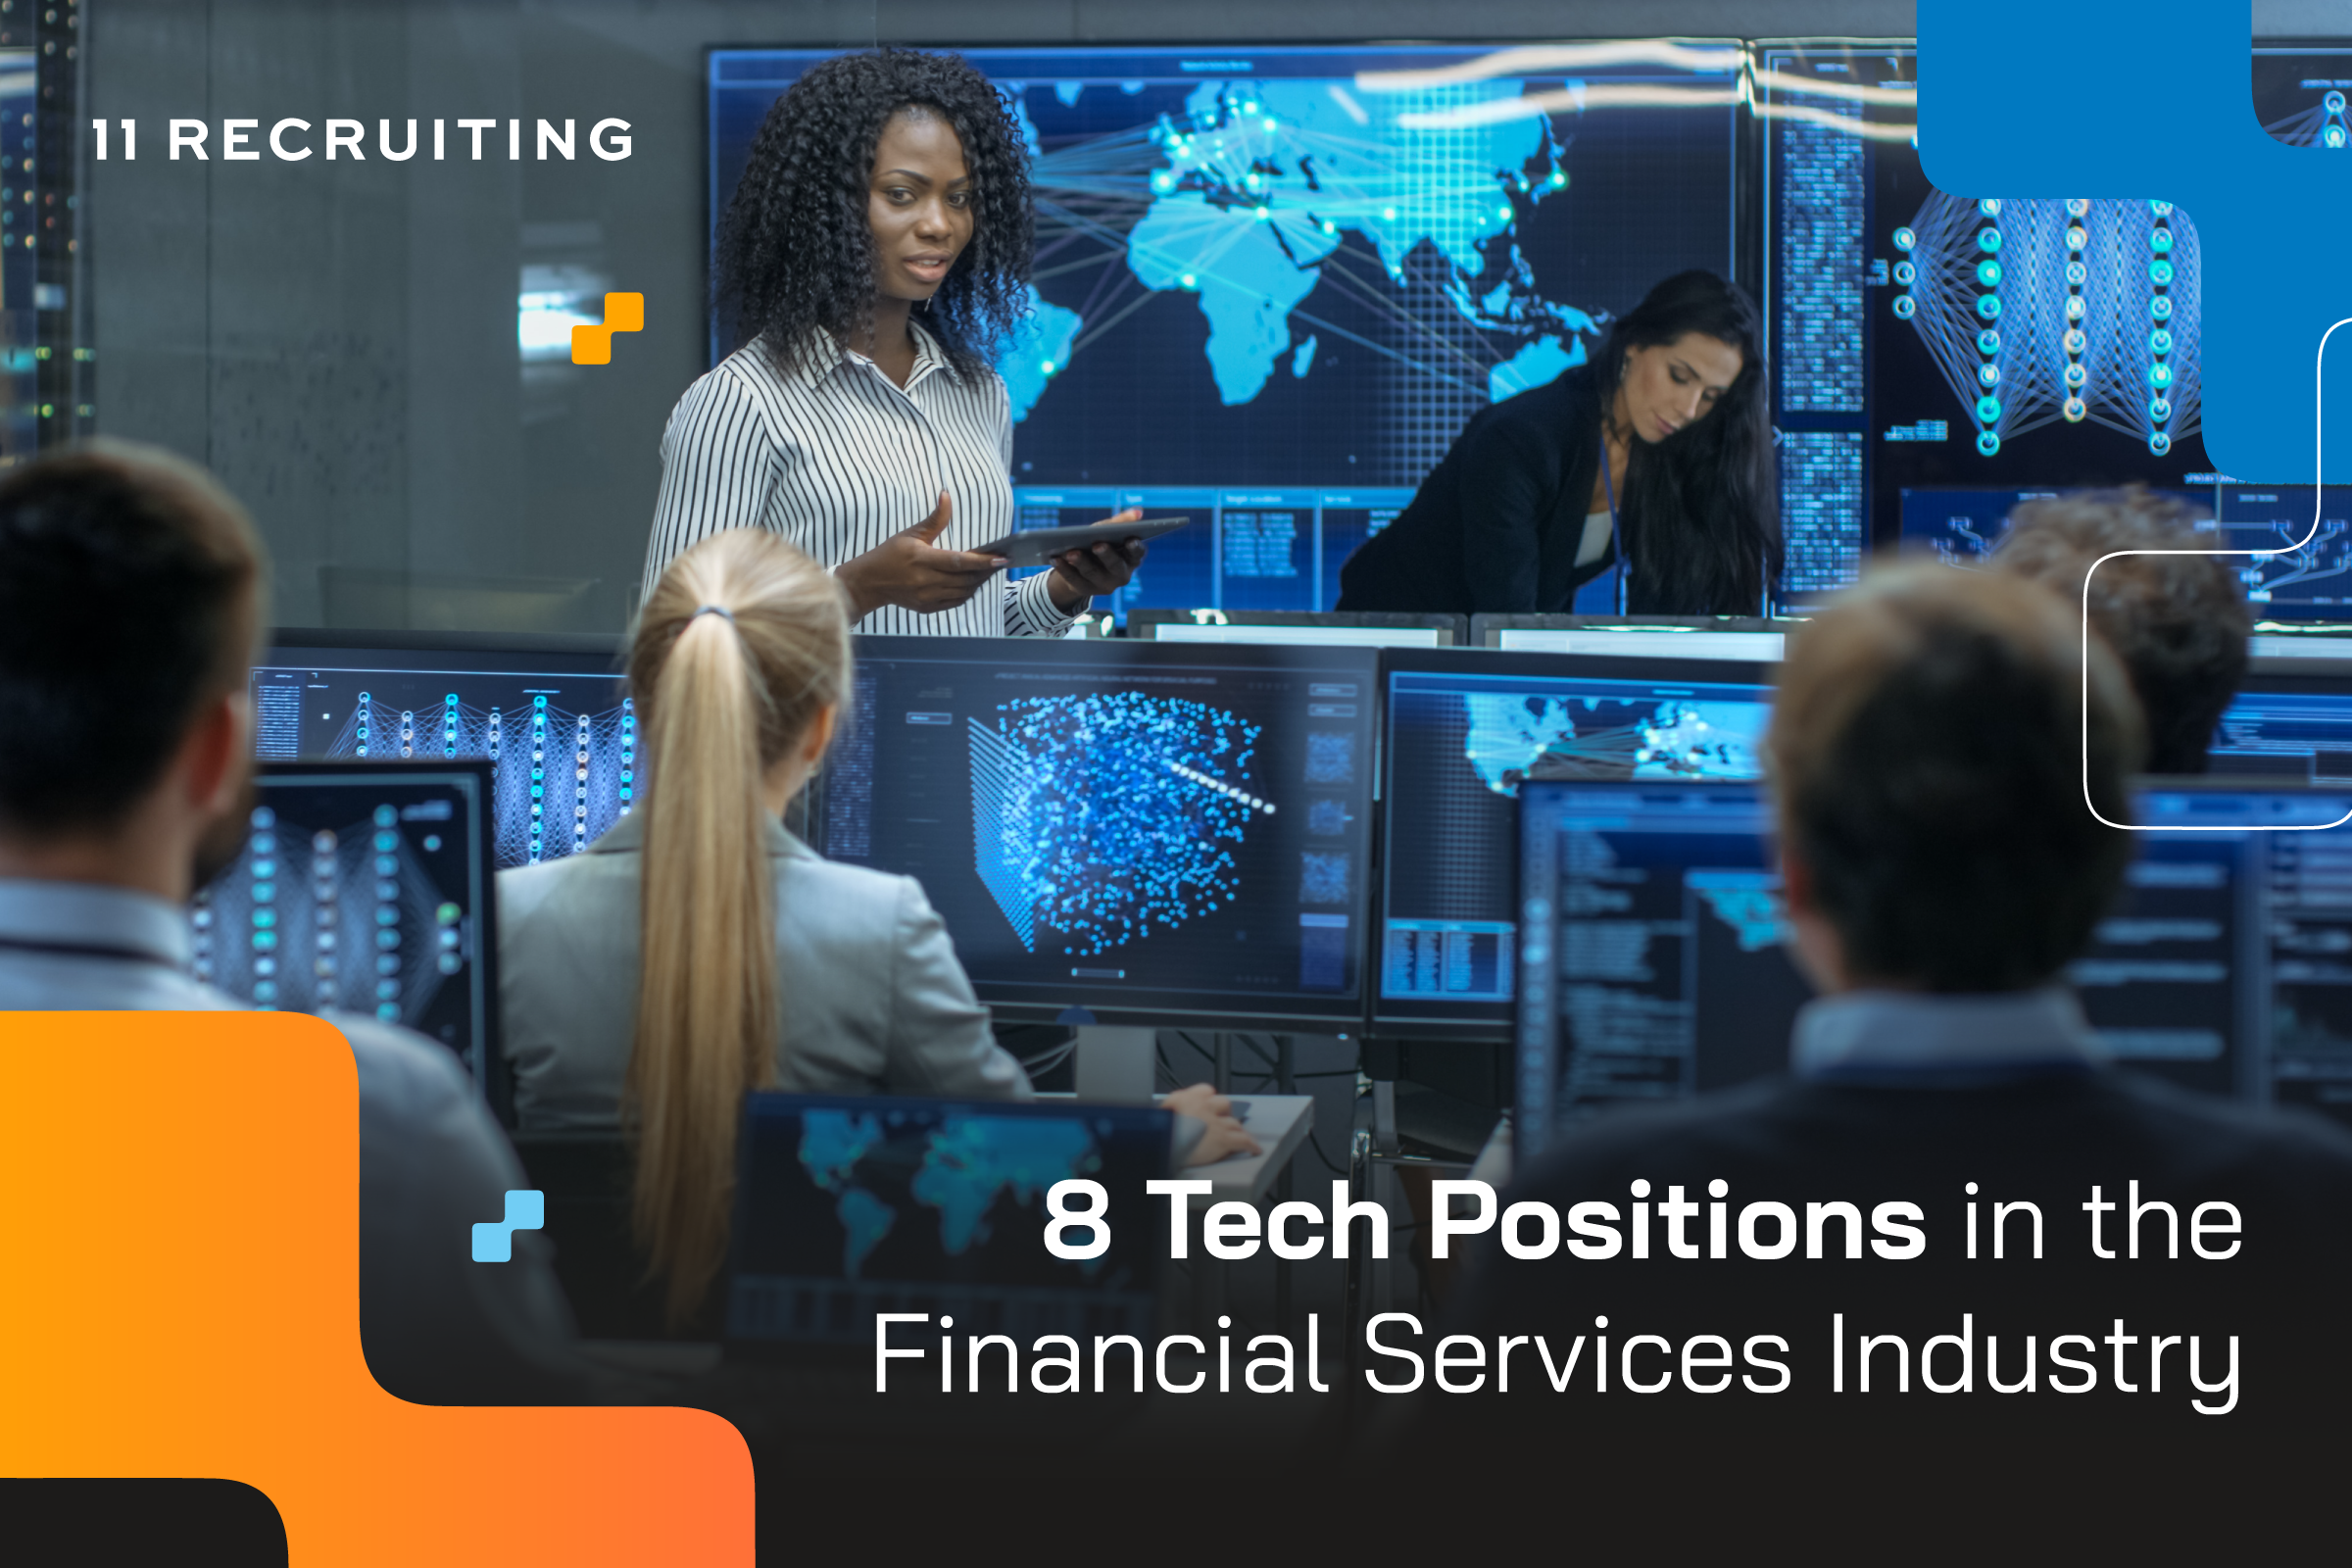 8 tech positions in the financial services industry